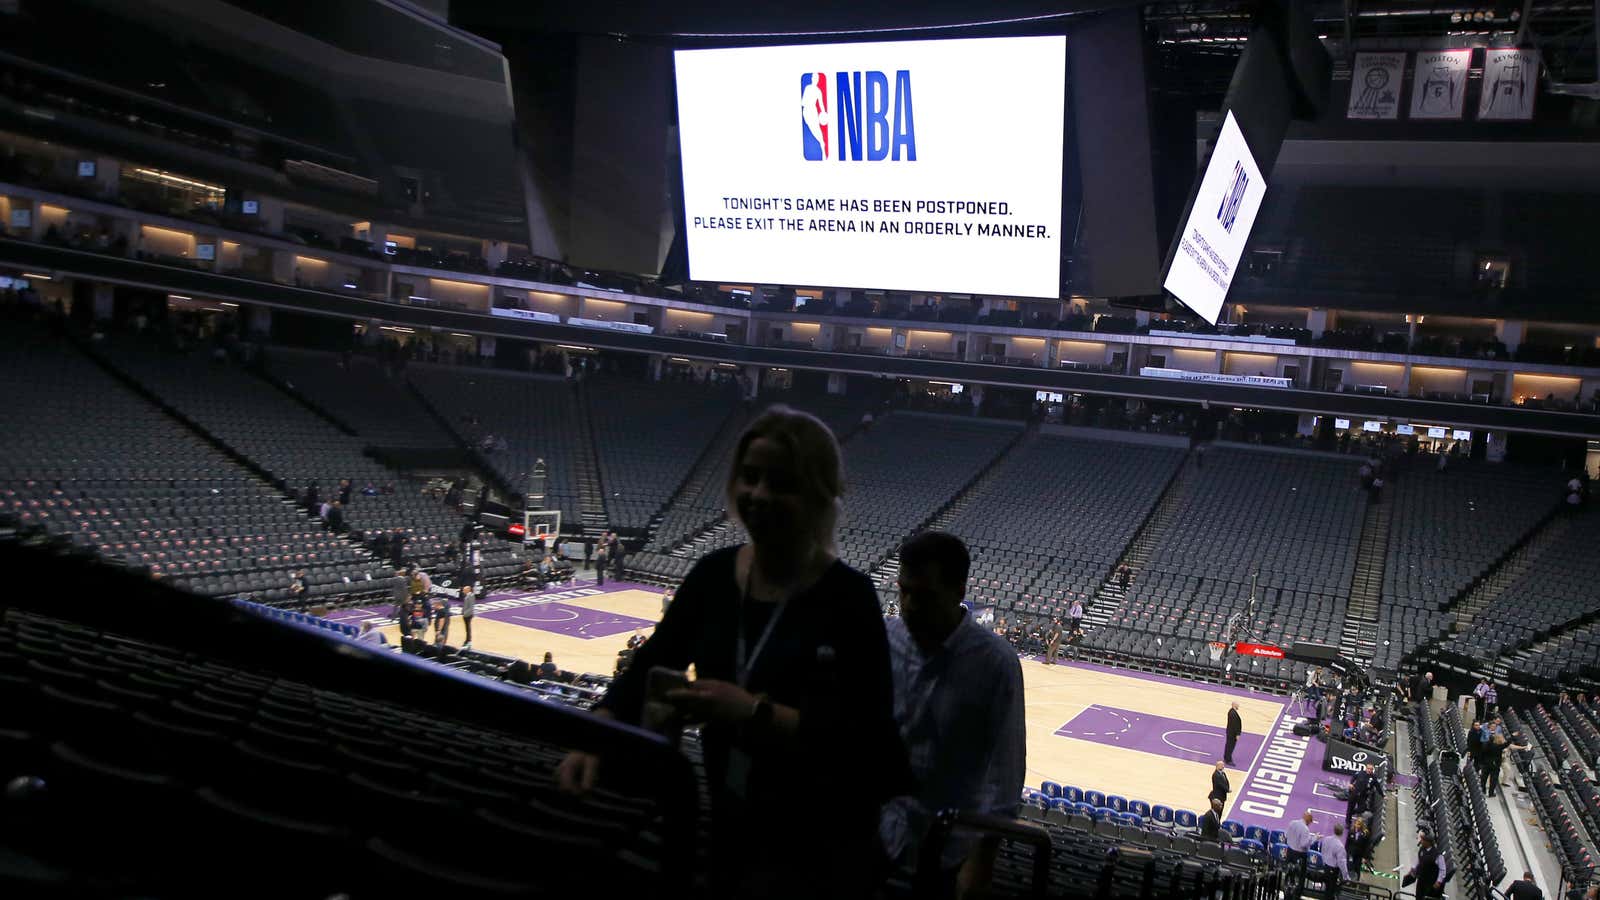 An ominous message looms above the court at Sacramento’s Golden 1 Center on March 11.